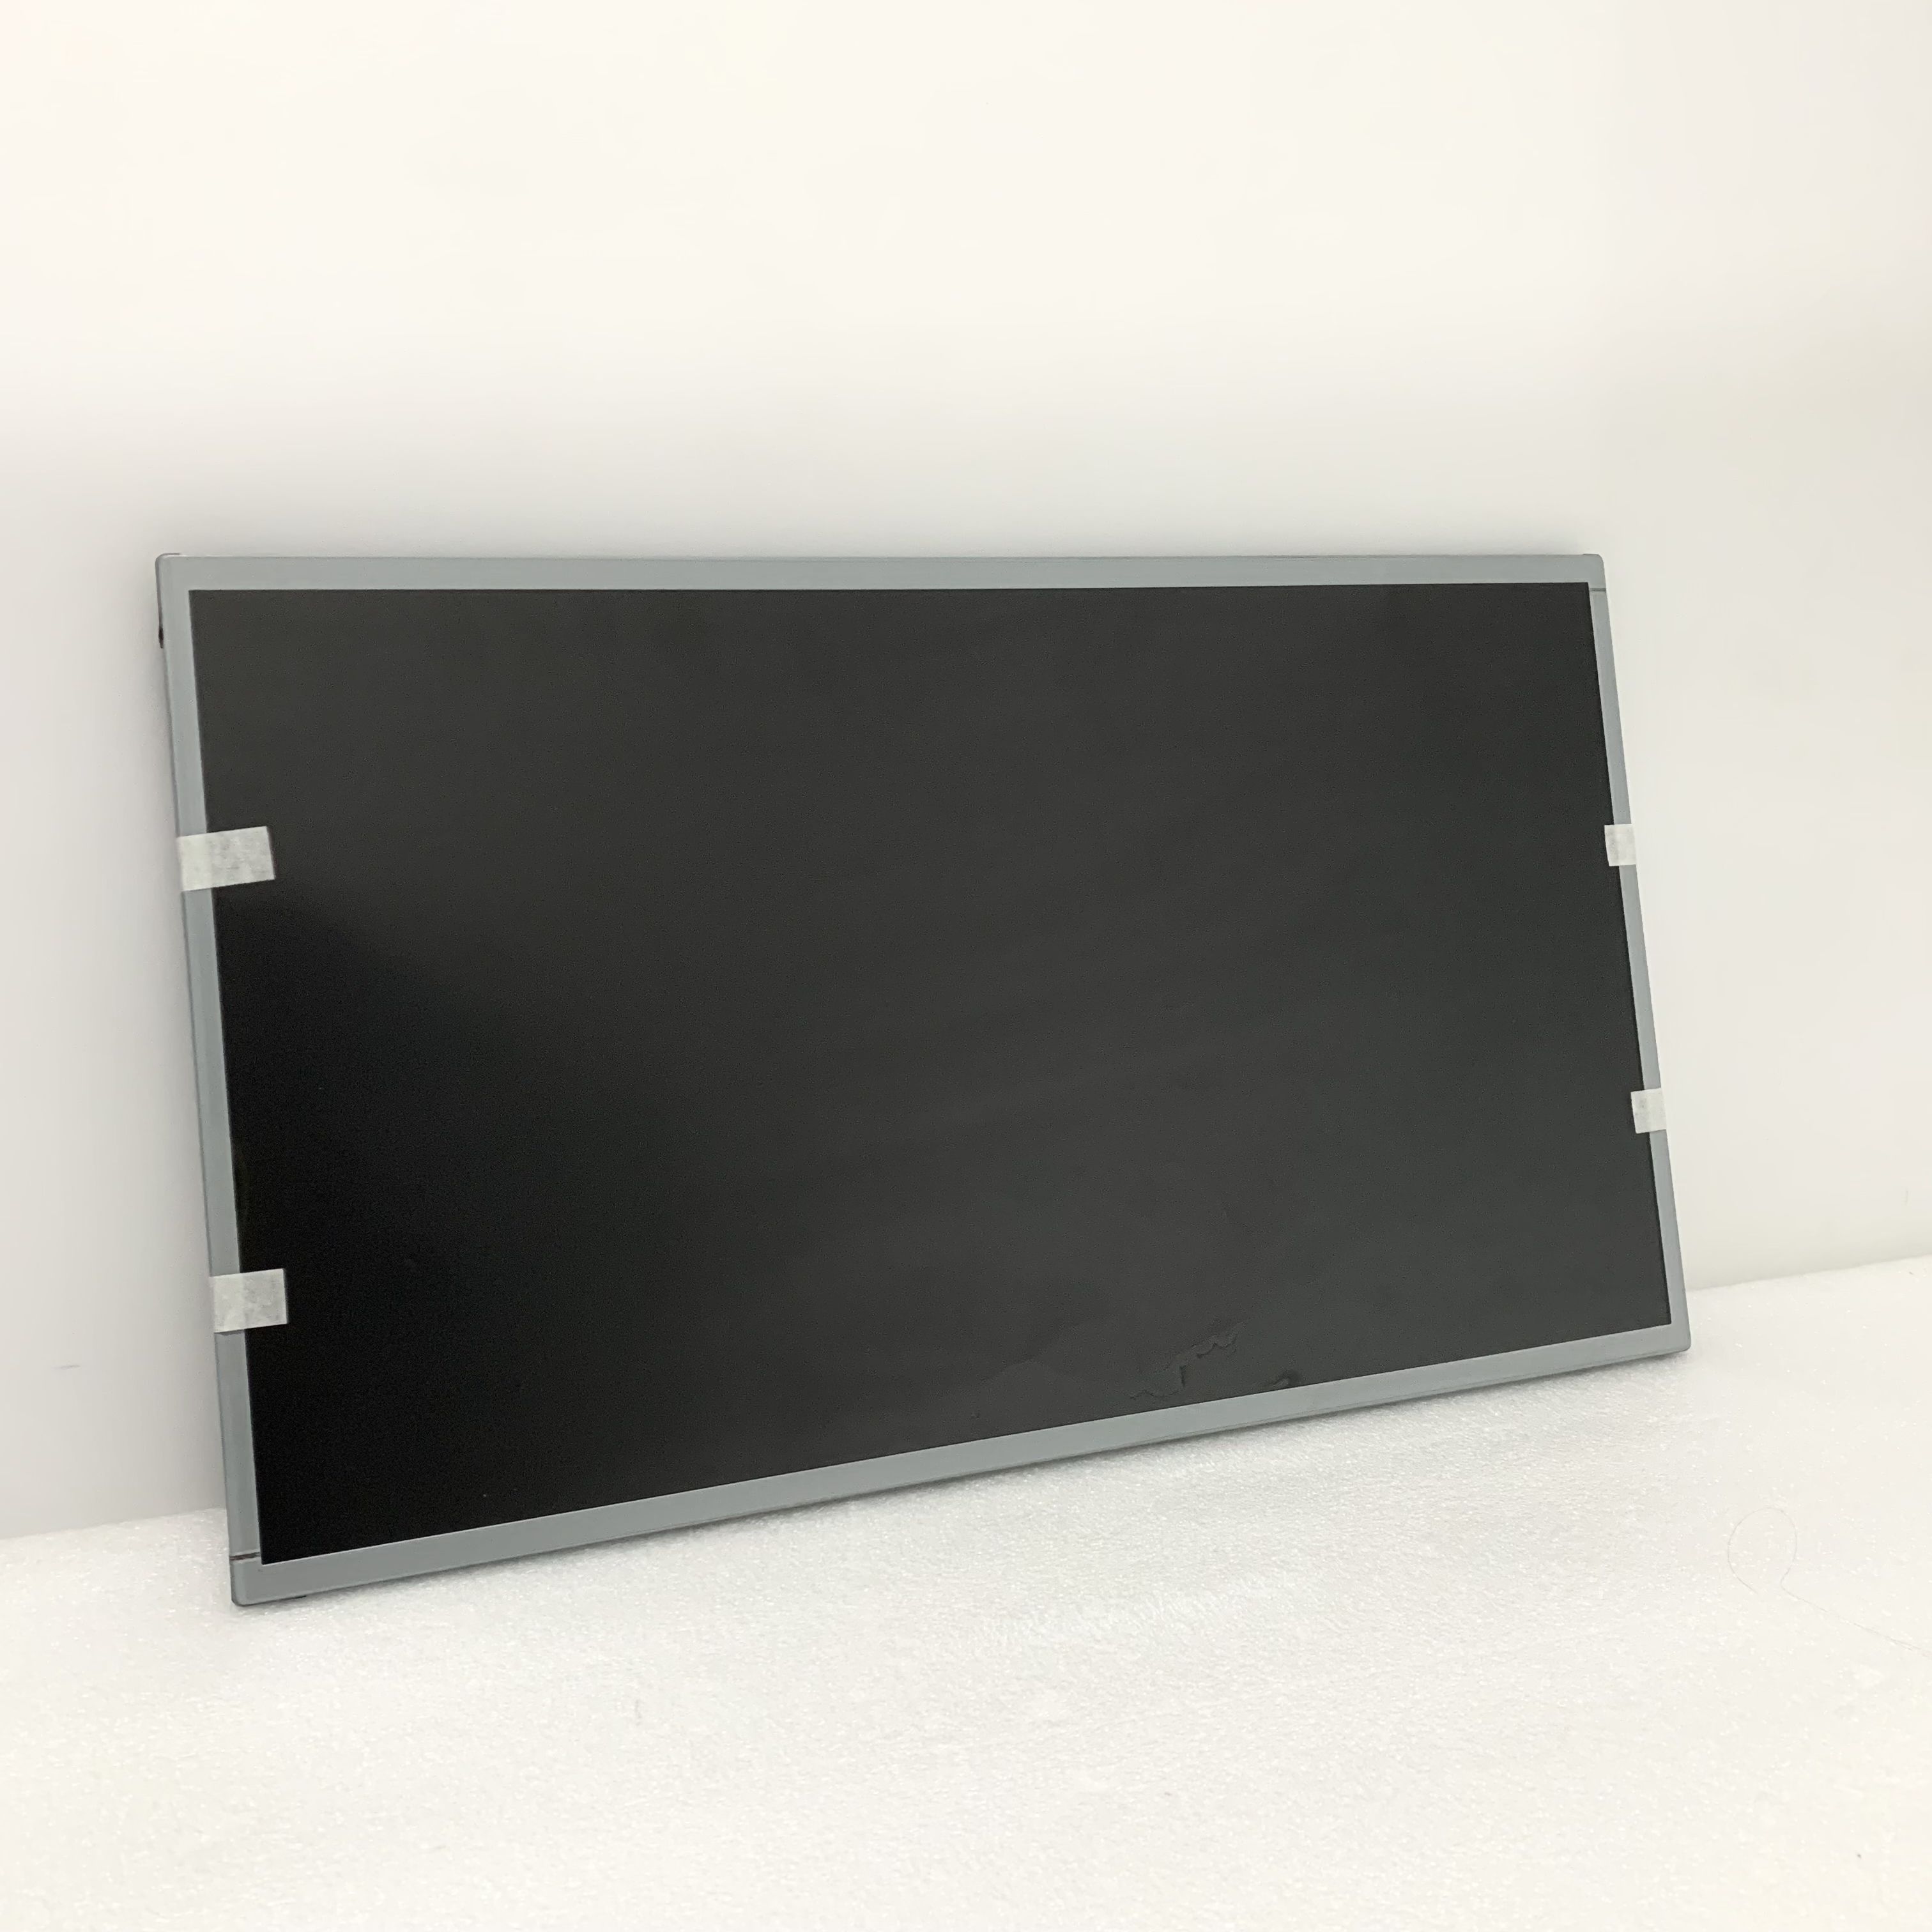 21.5 Inch 1000nits High Brightness Display 1920x1080 Resolution IPS Capacitive Color TFT LCD Screen LVDS Interface Display